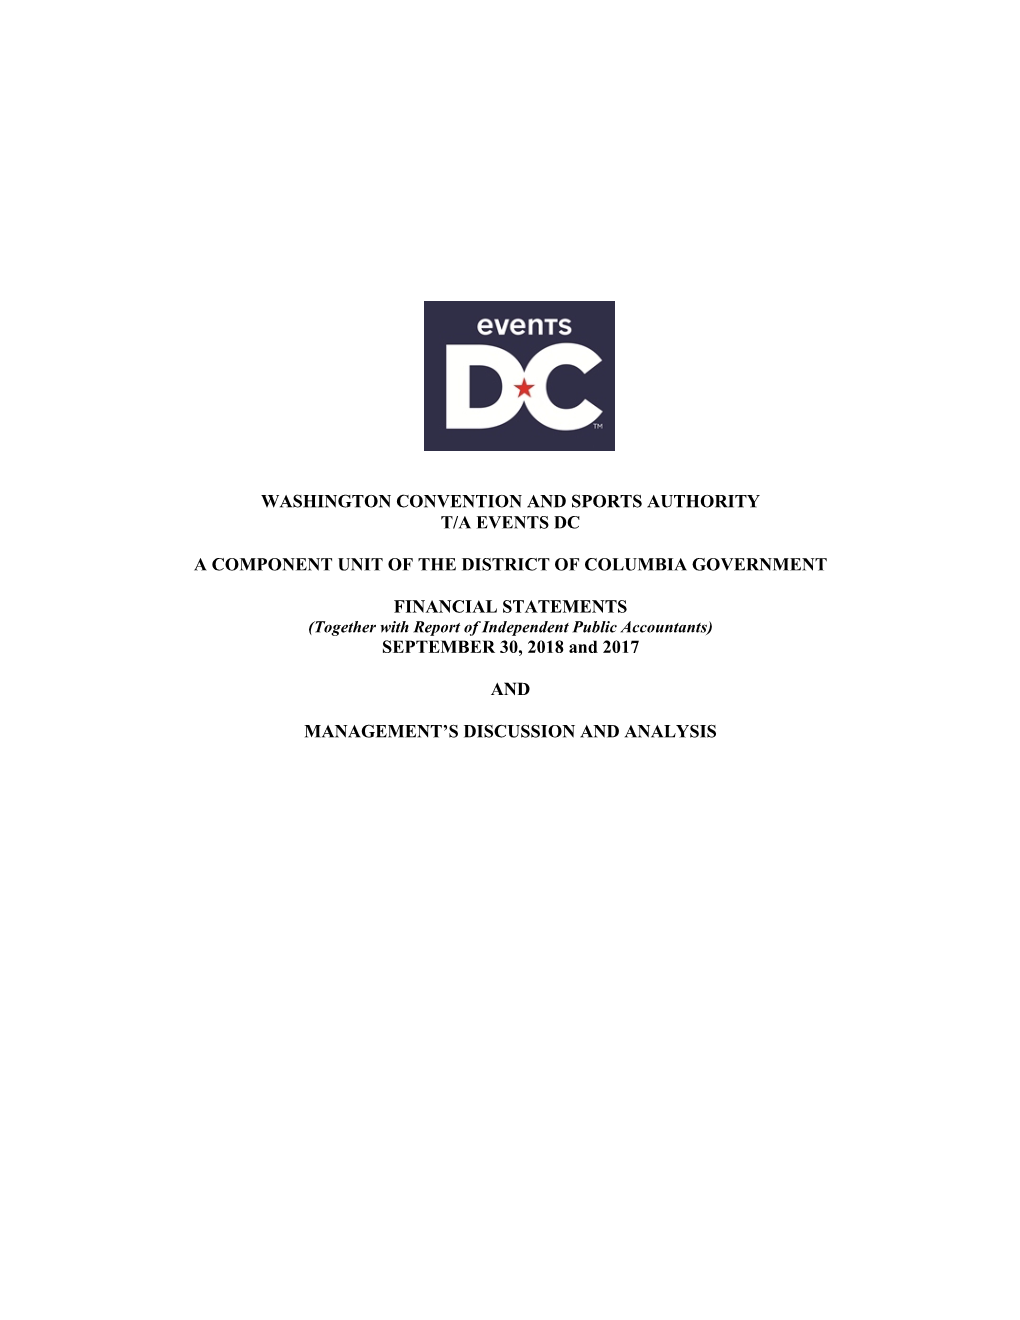 Washington Convention and Sports Authority T/A Events Dc